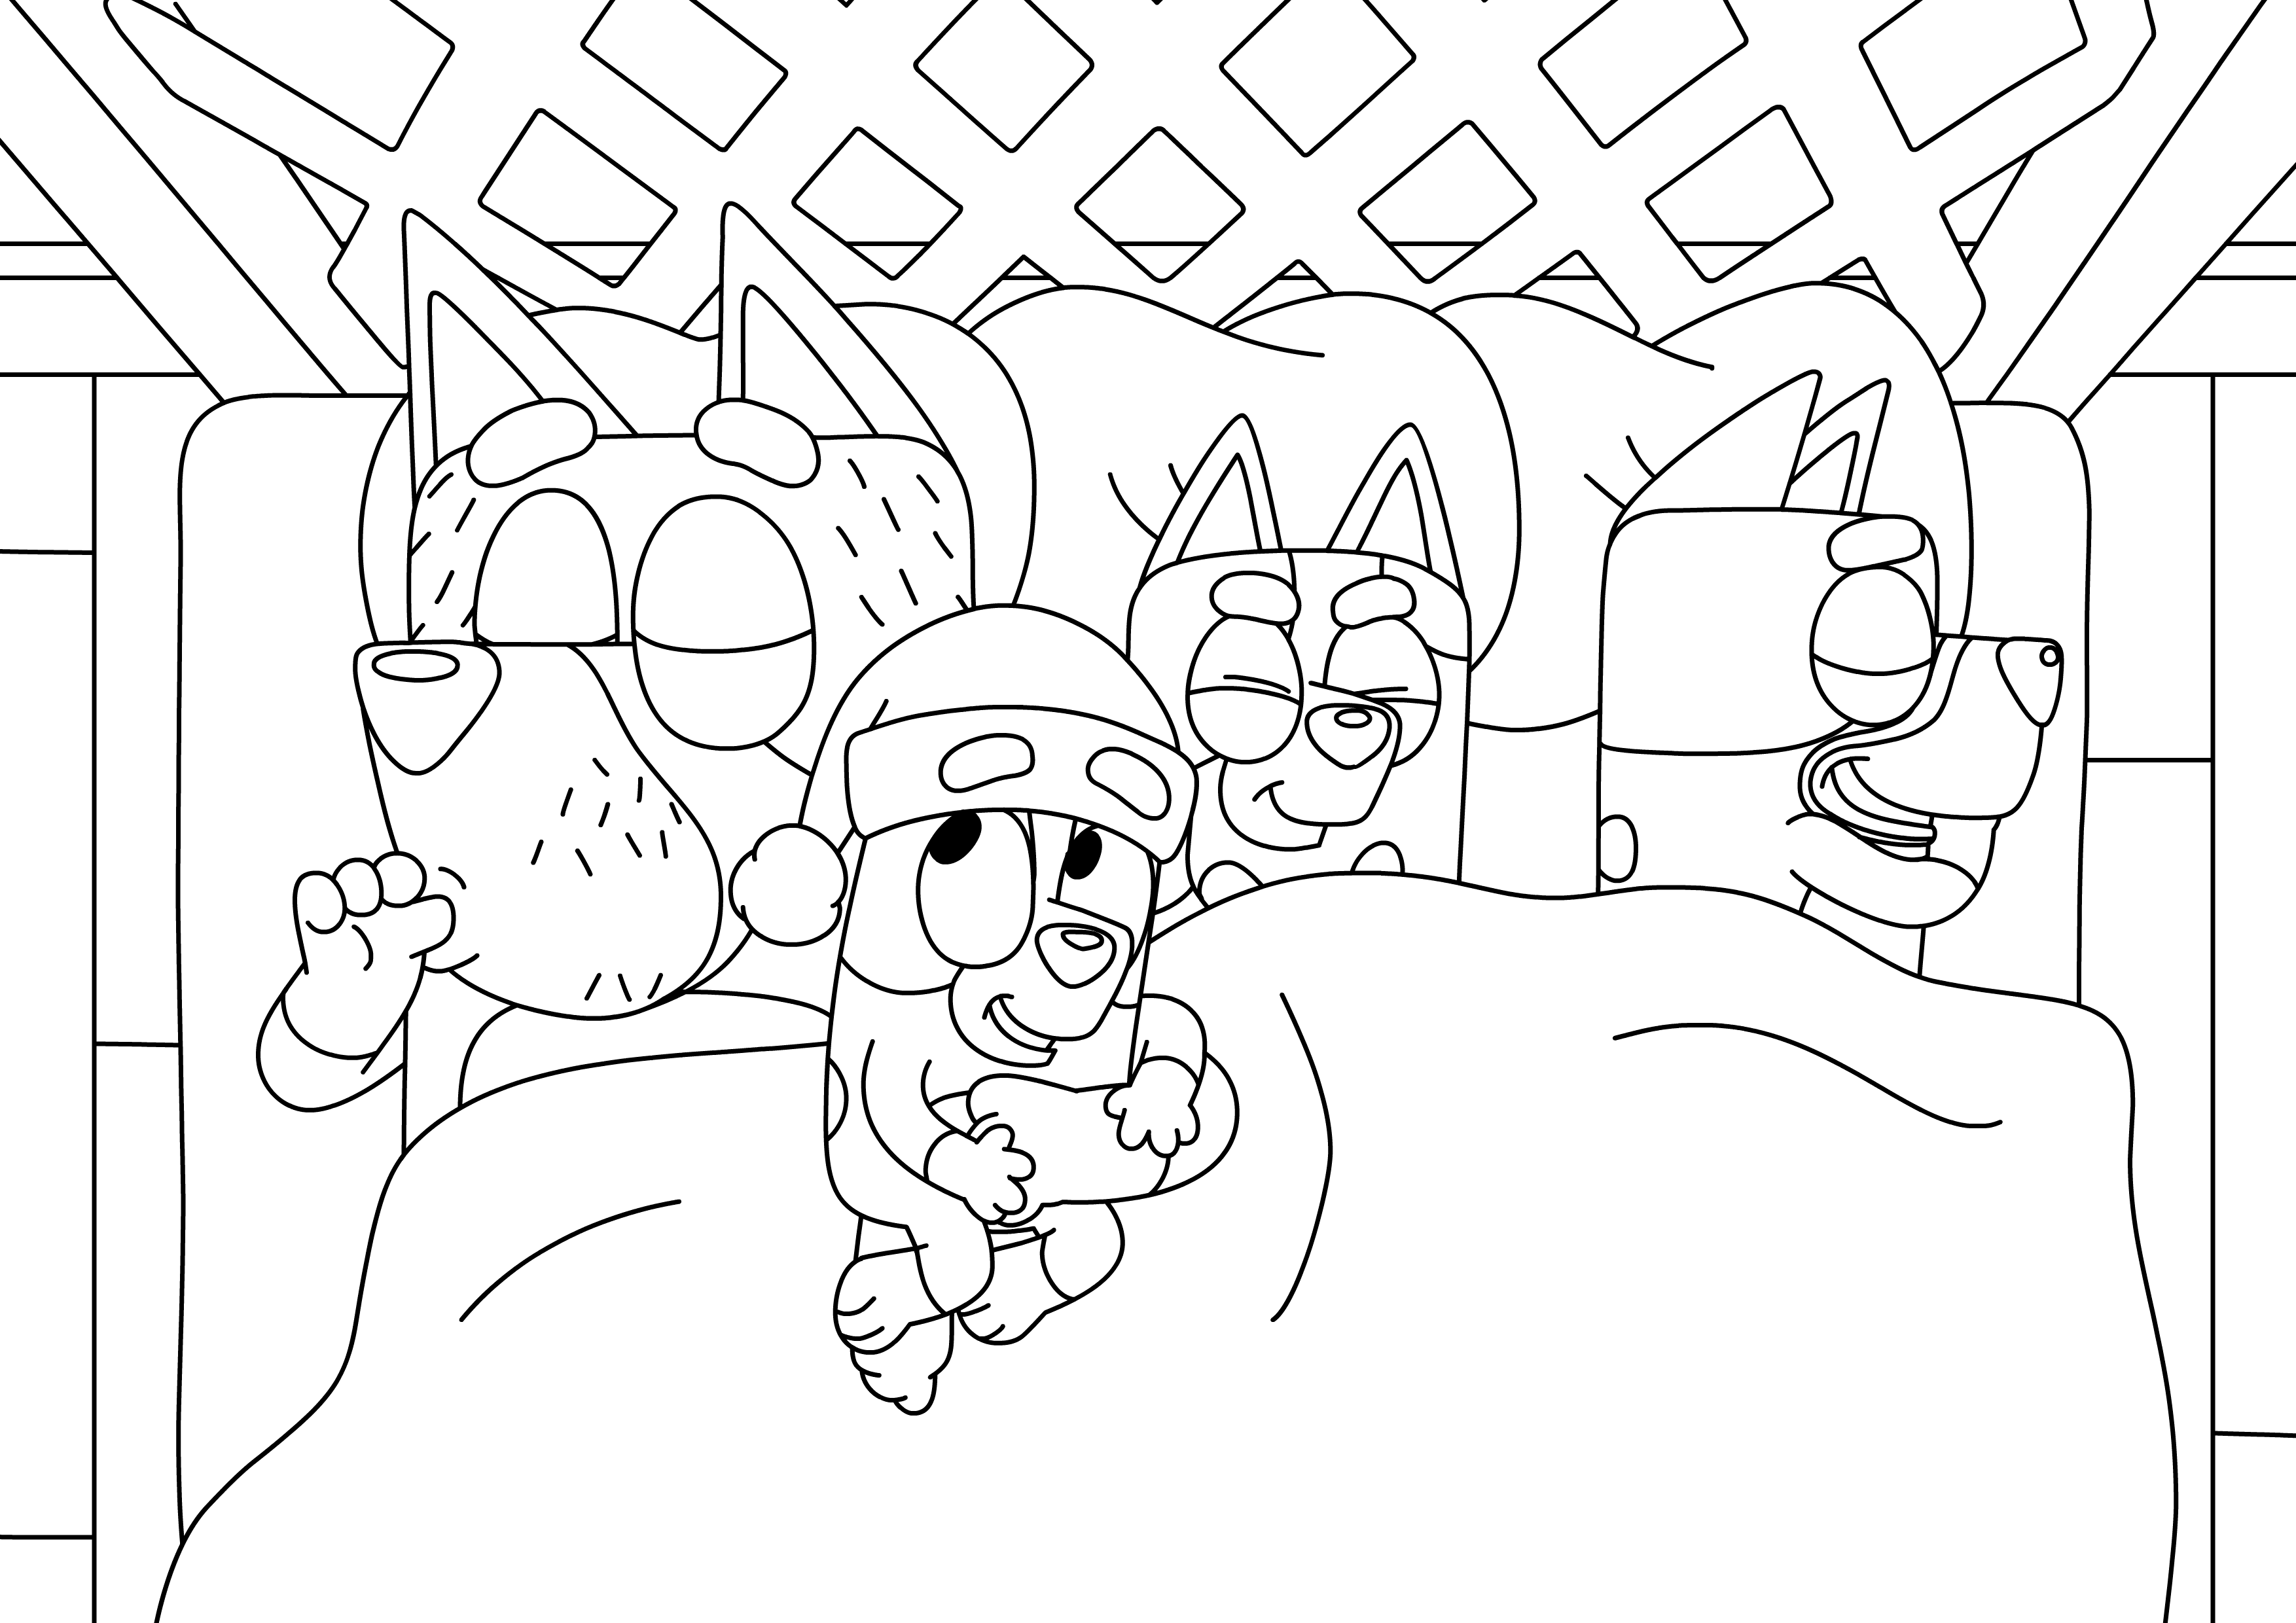 No Peeking Bluey Sleep With Family Coloring Pages   Coloring Cool